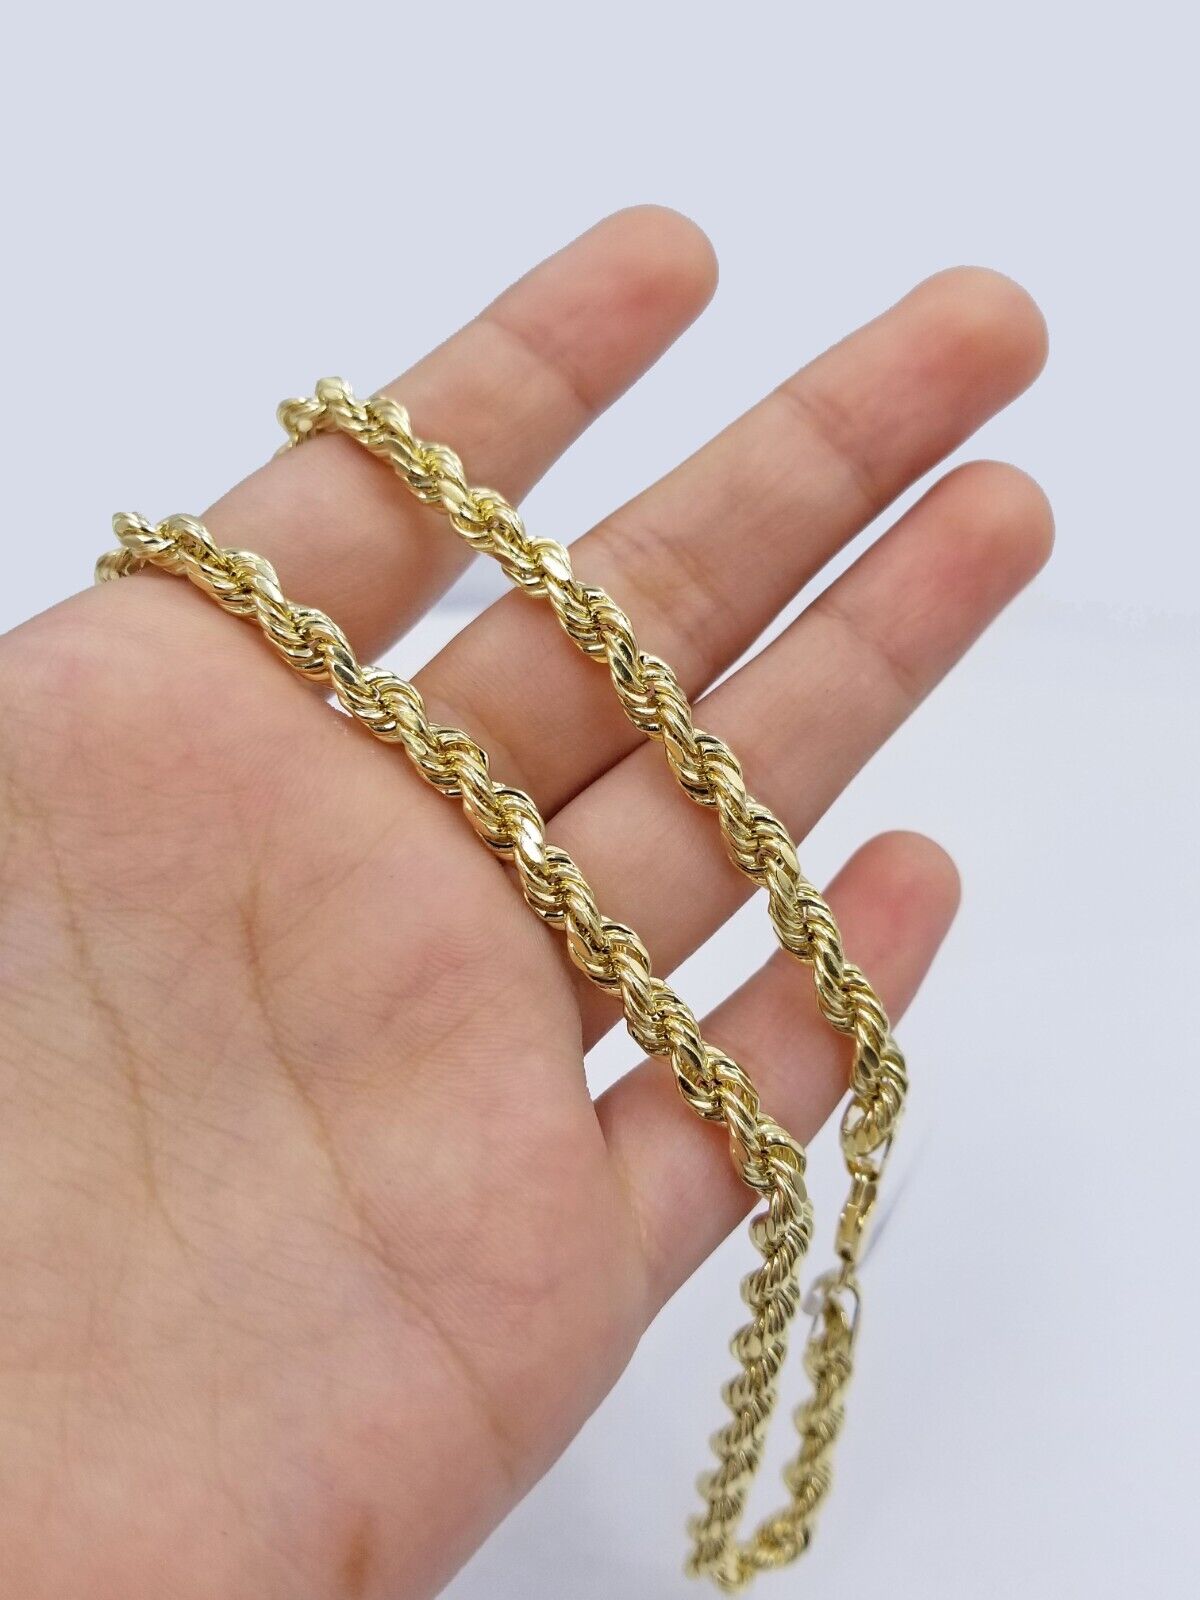 Real 14K Yellow Gold Necklace Rope Chain 5mm 20 inch 14kt Men's Chain for Charm